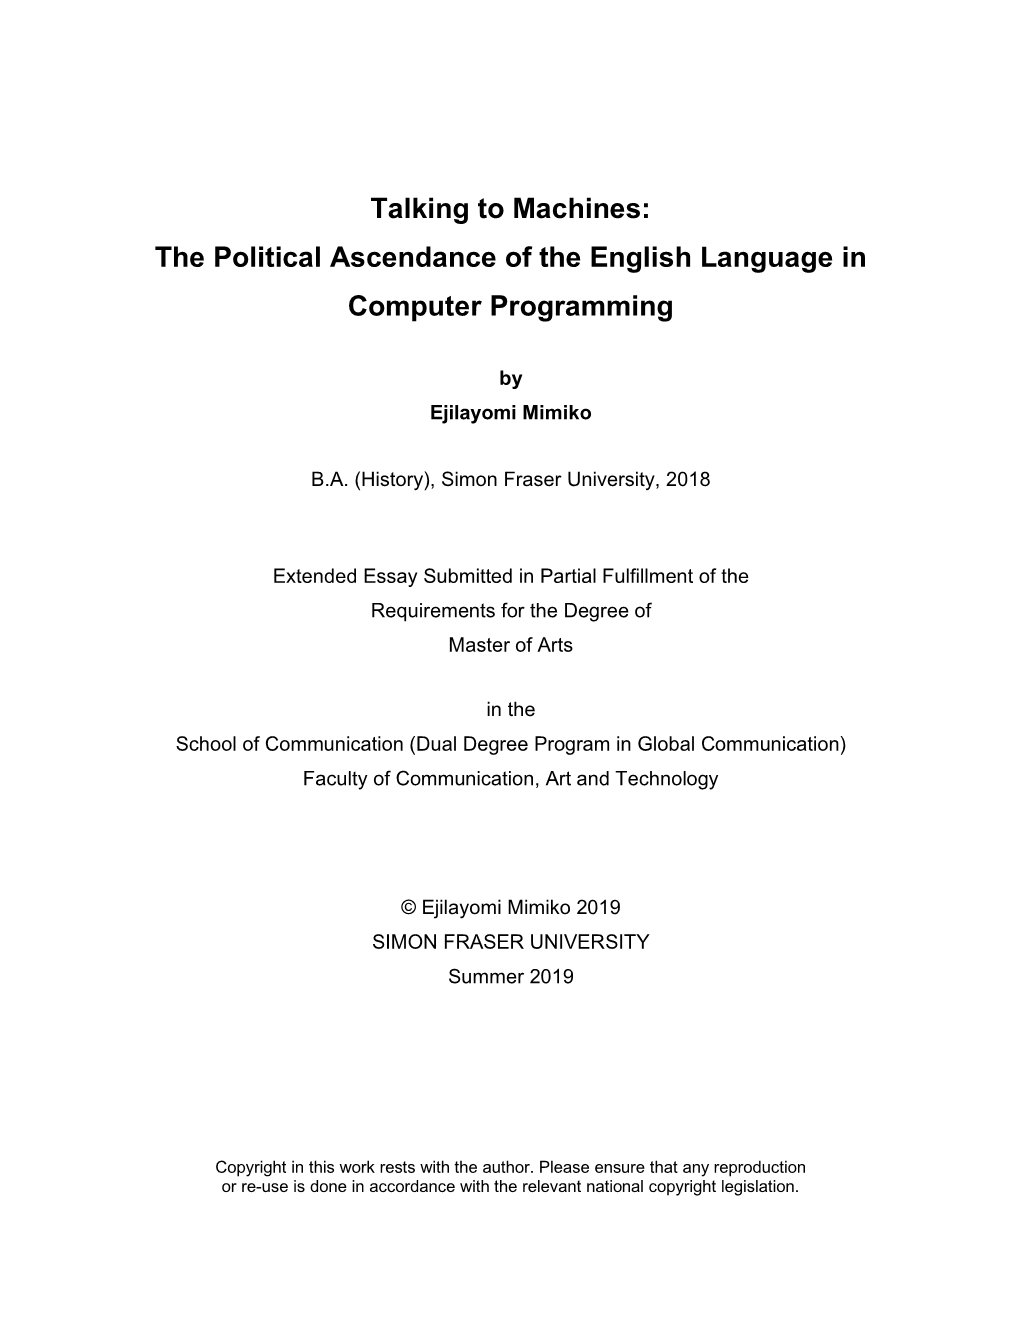 The Political Ascendance of the English Language in Computer Programming